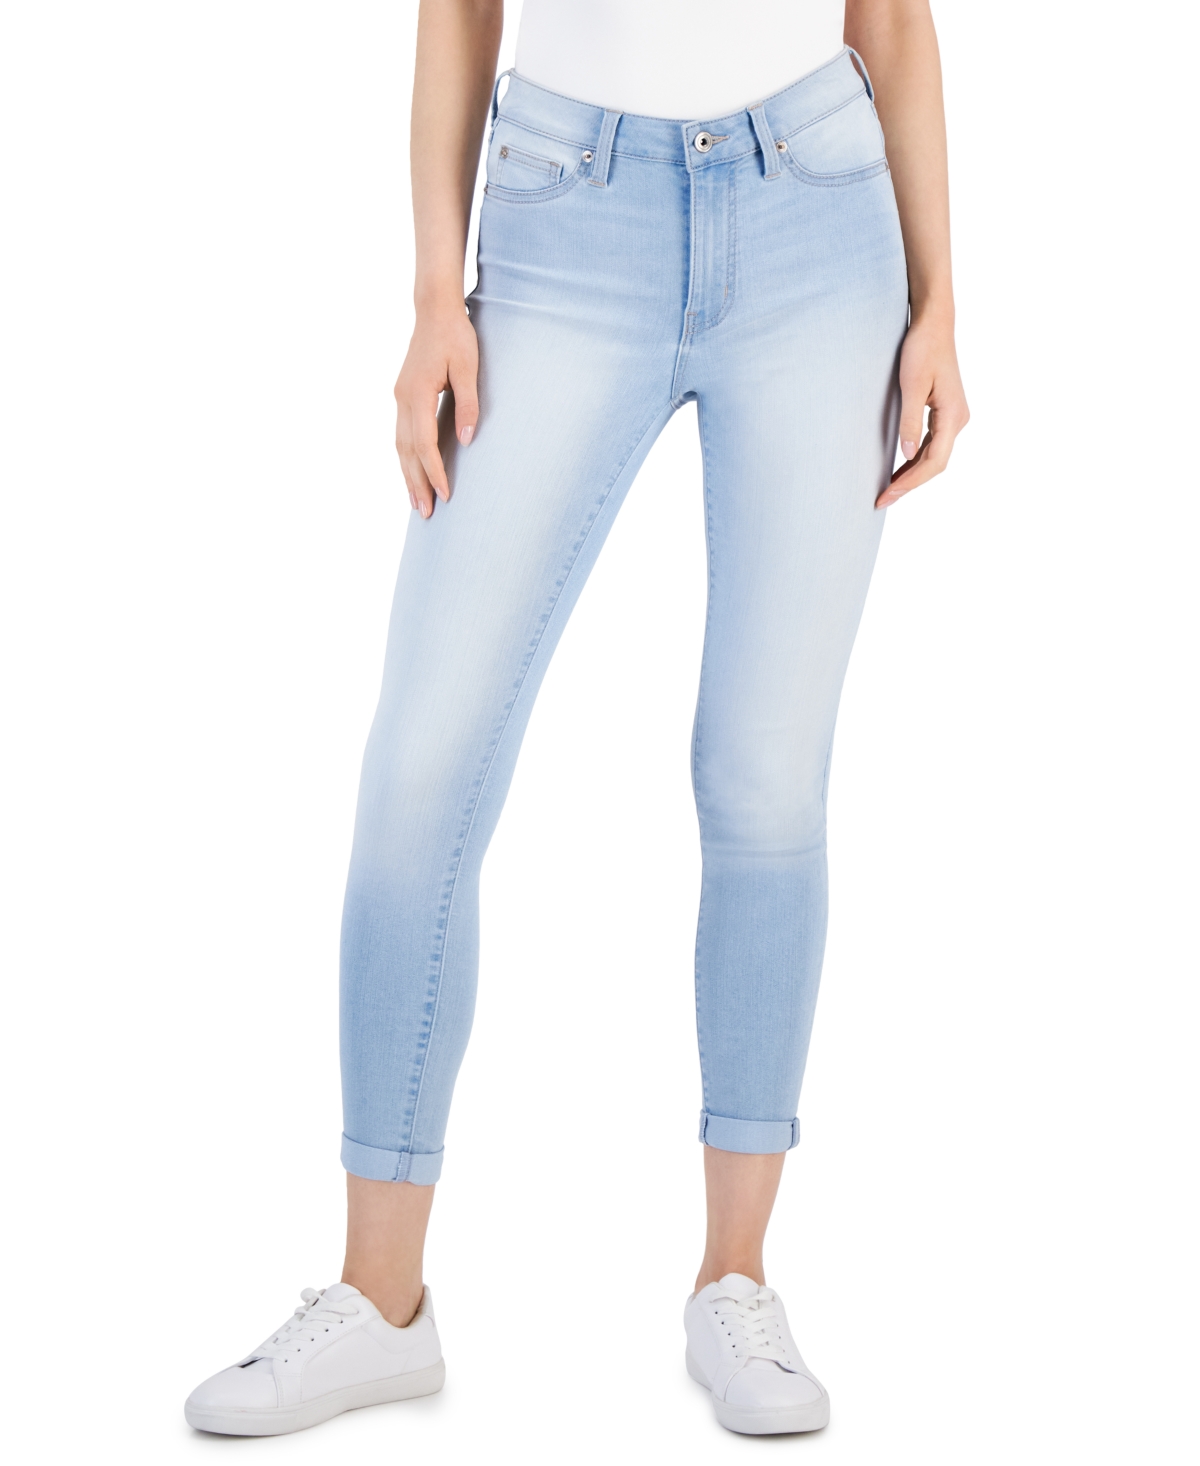 Juniors' Ankle Skinny Jeans - Summer Day